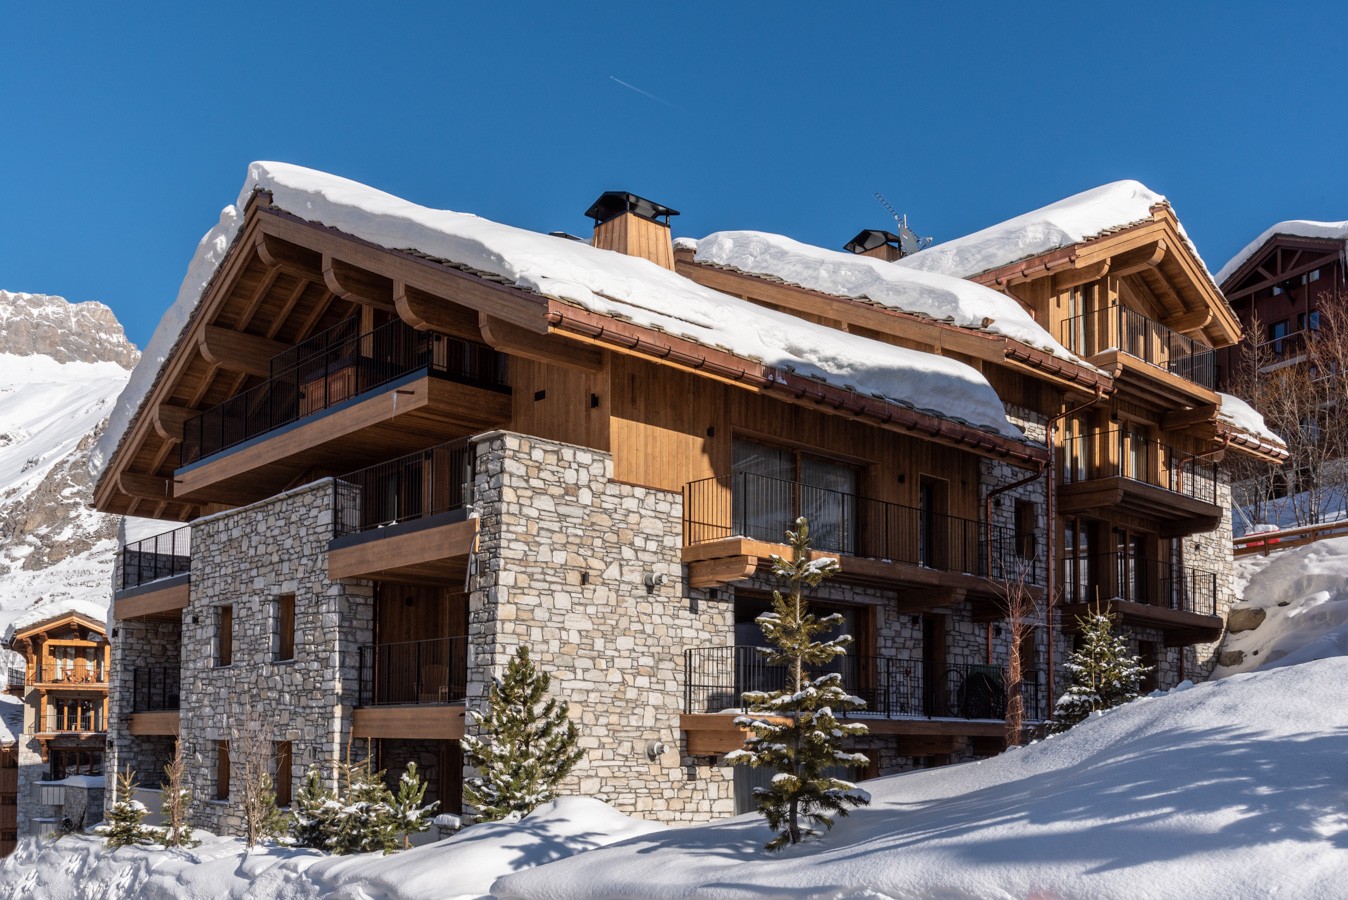 val-d'-isère-location-appartement-luxe-tanite